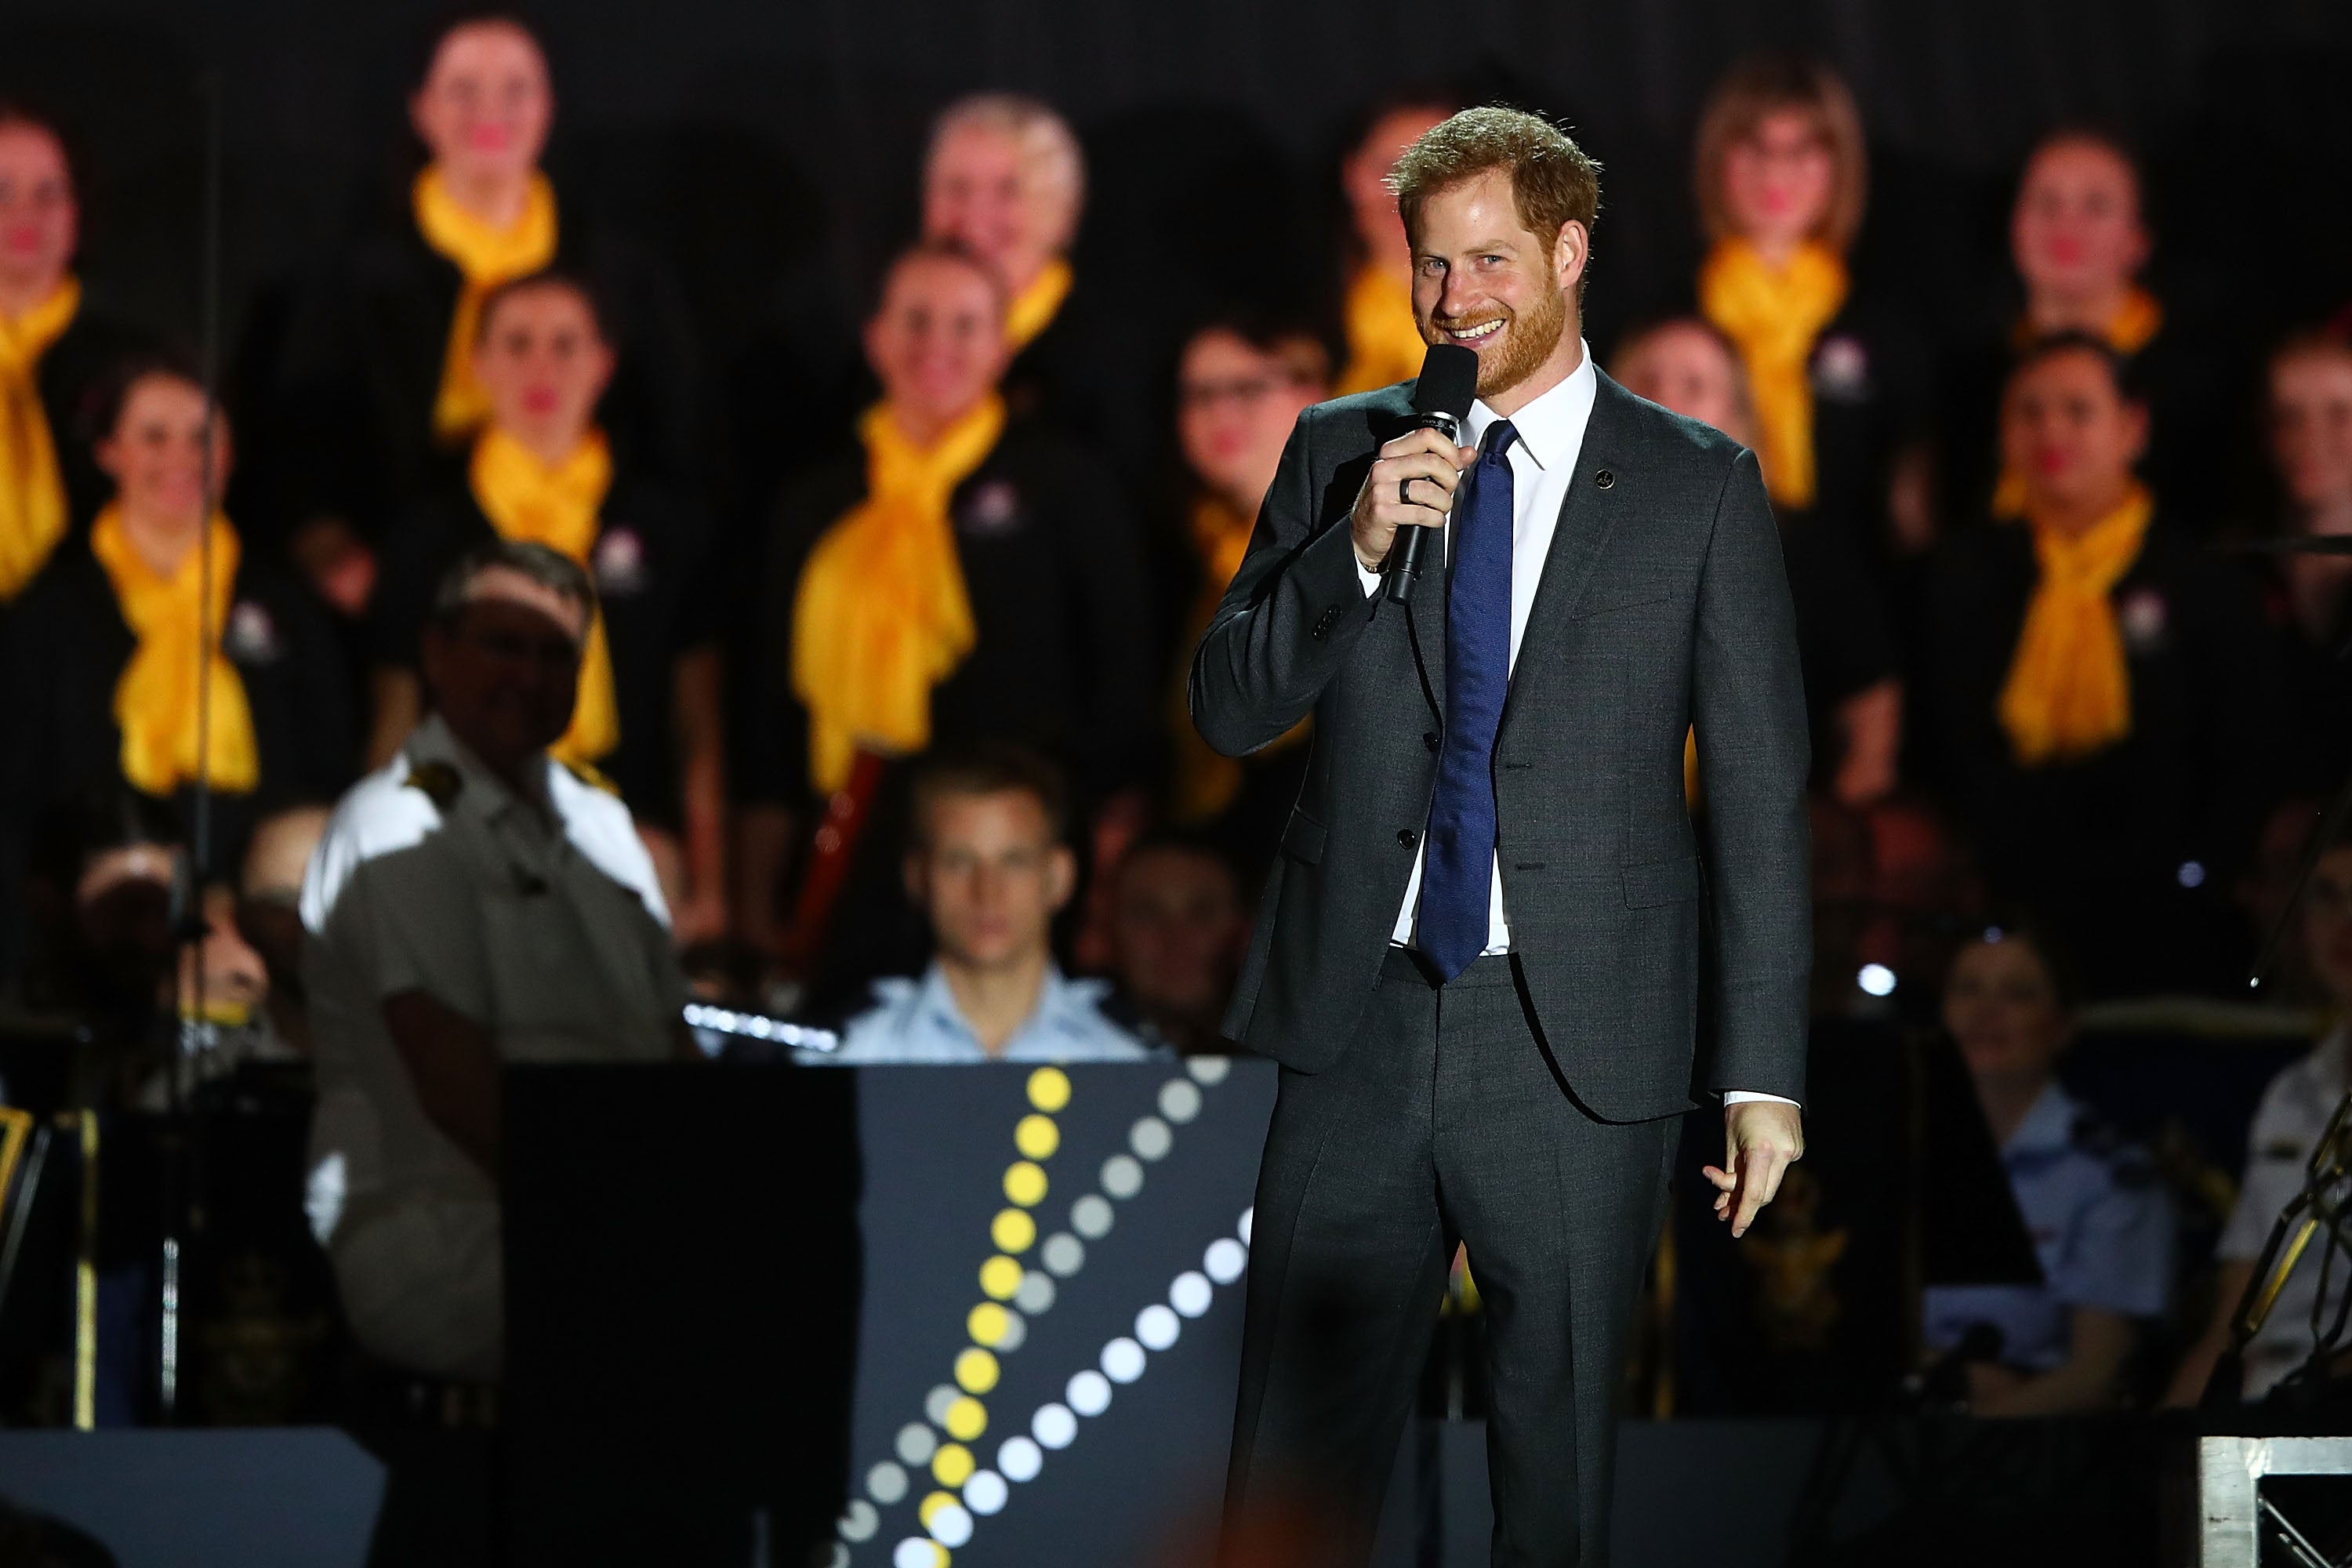 Prince Harry speaks during the opening ceremony of the 2018 Invictus Games in Sydney, Australia